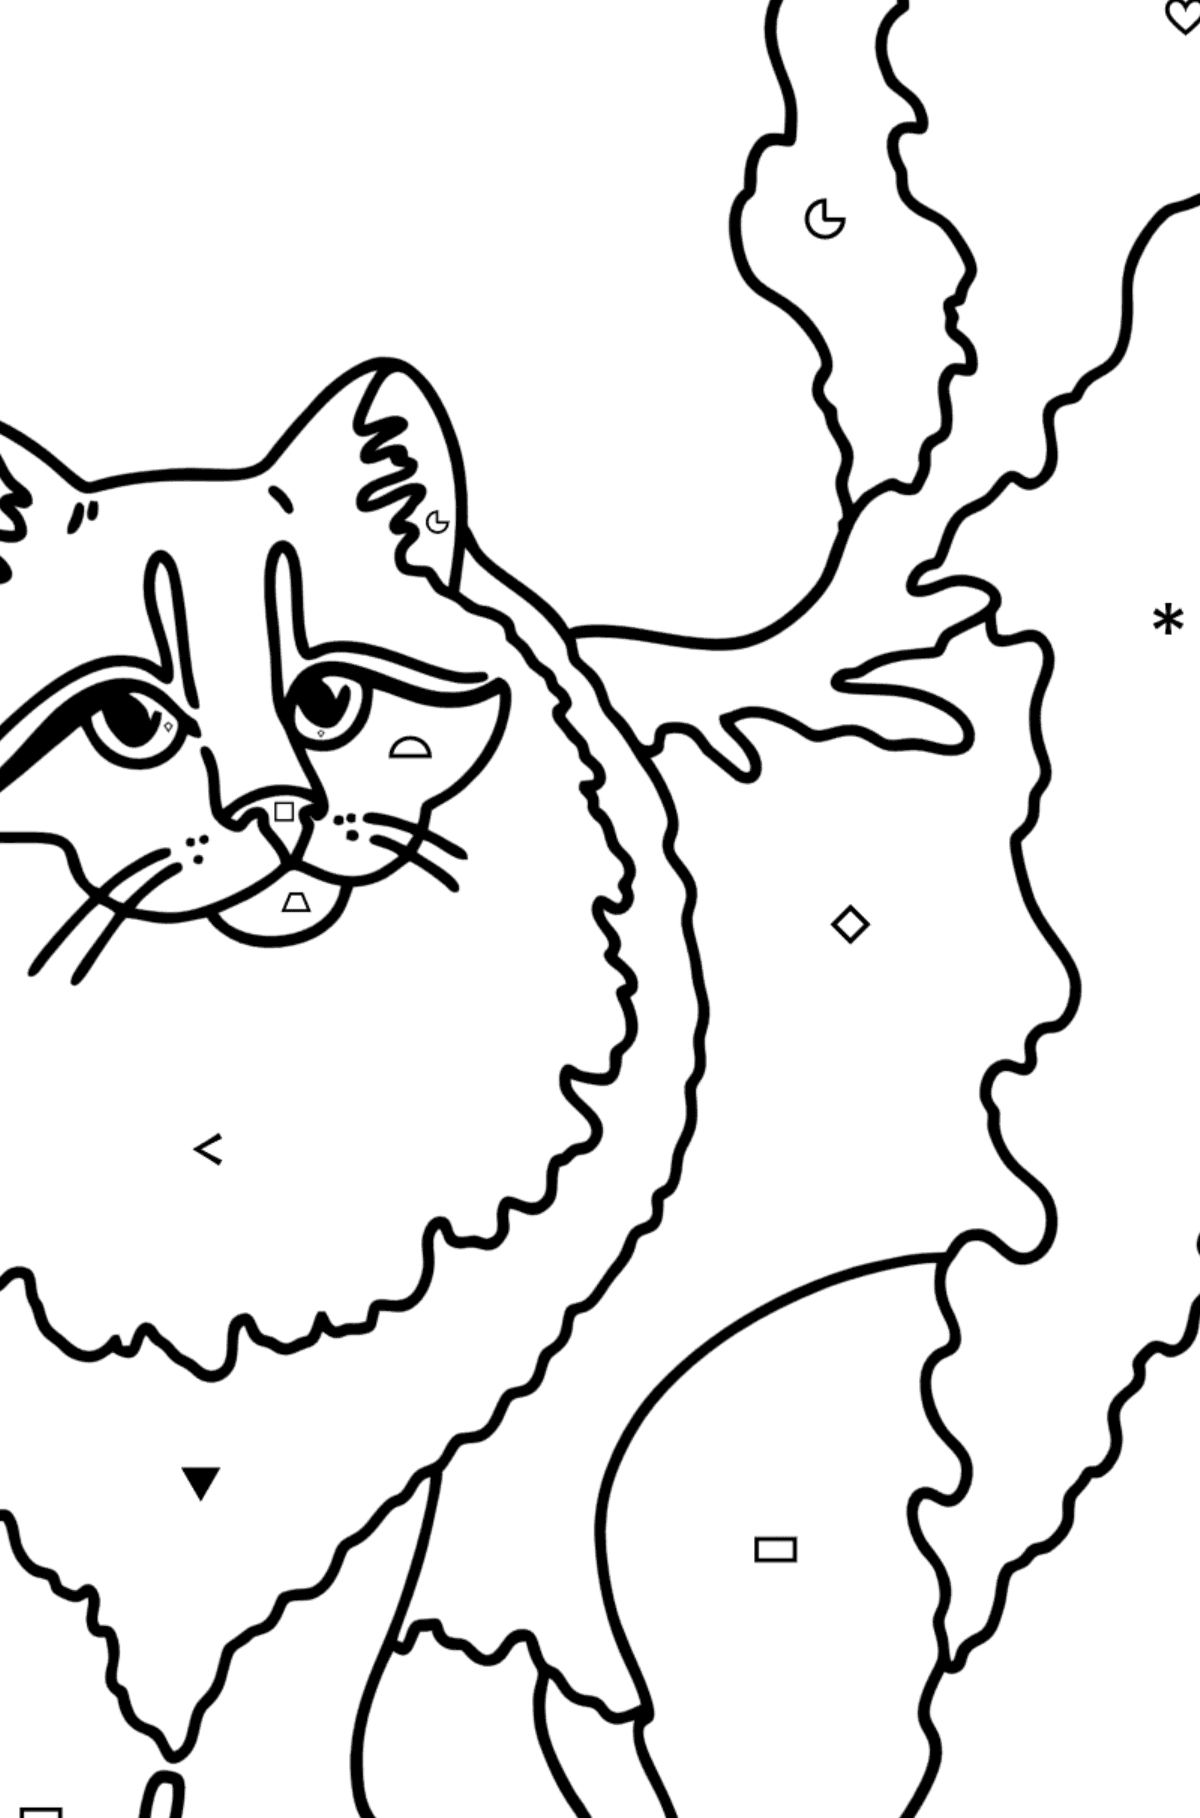 Siberian Cat coloring page - Coloring by Symbols and Geometric Shapes for Kids